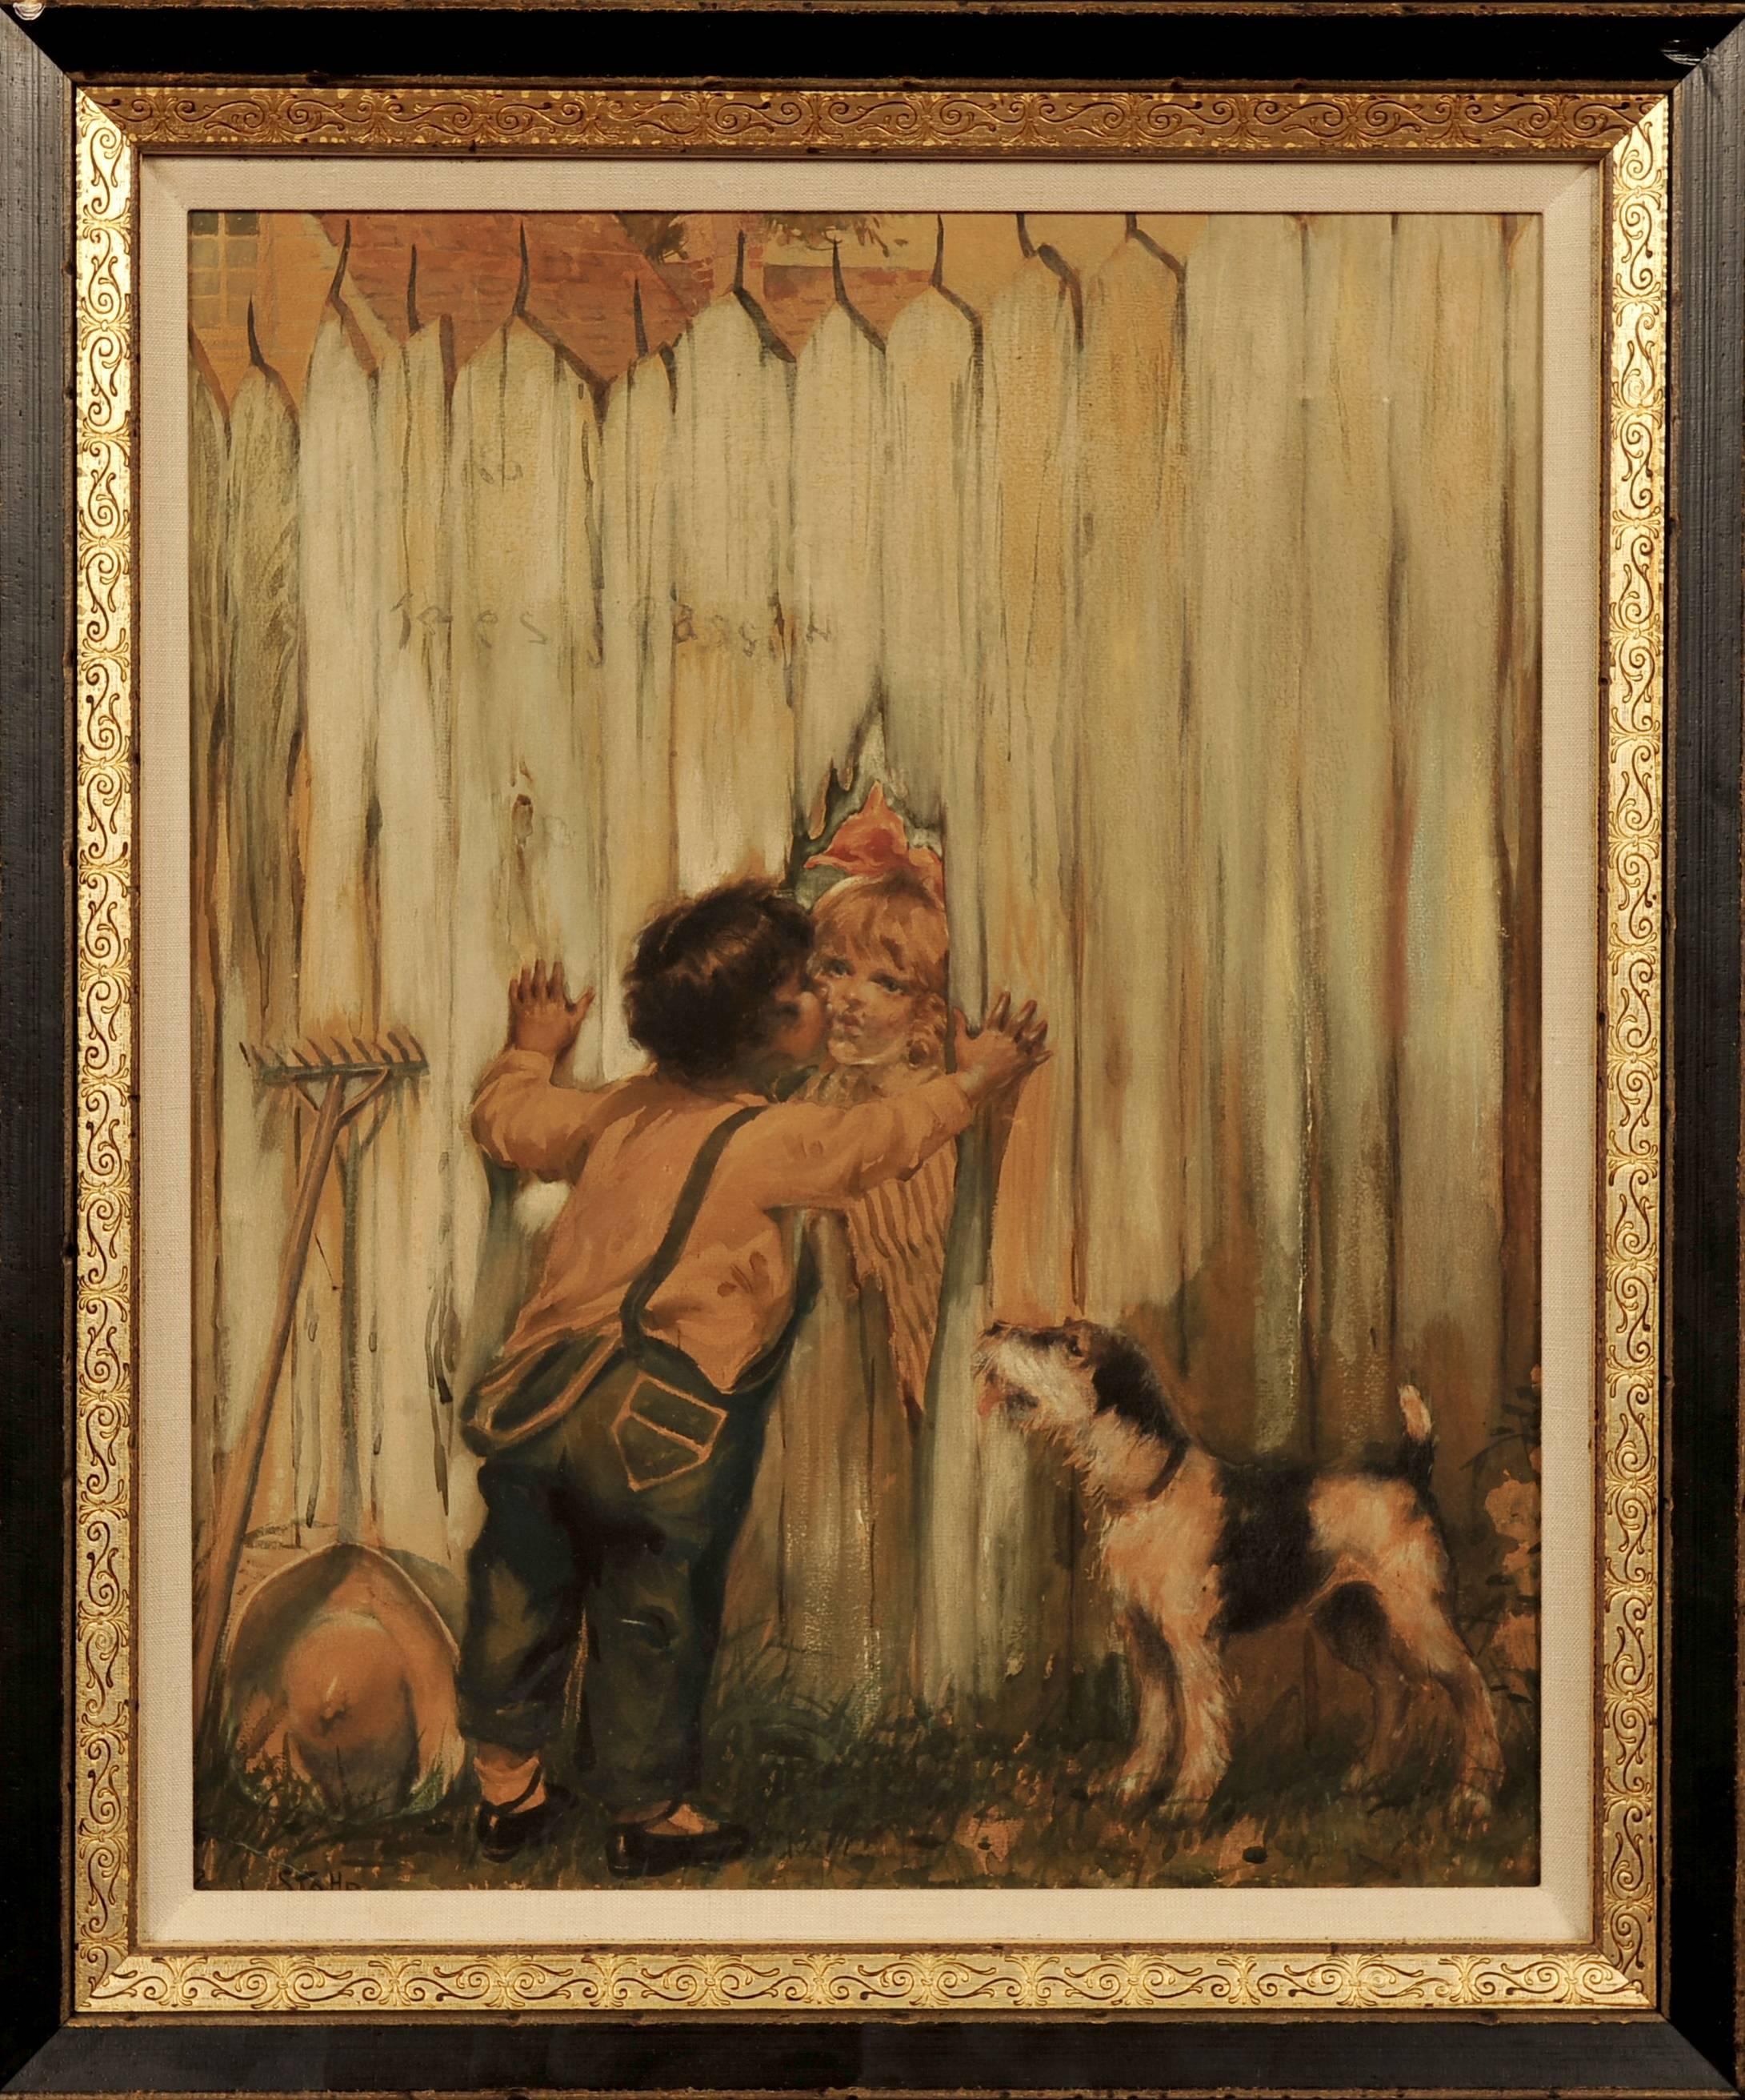 Boy Kissing Girl Through Fence - Painting by Paul C. Stahr